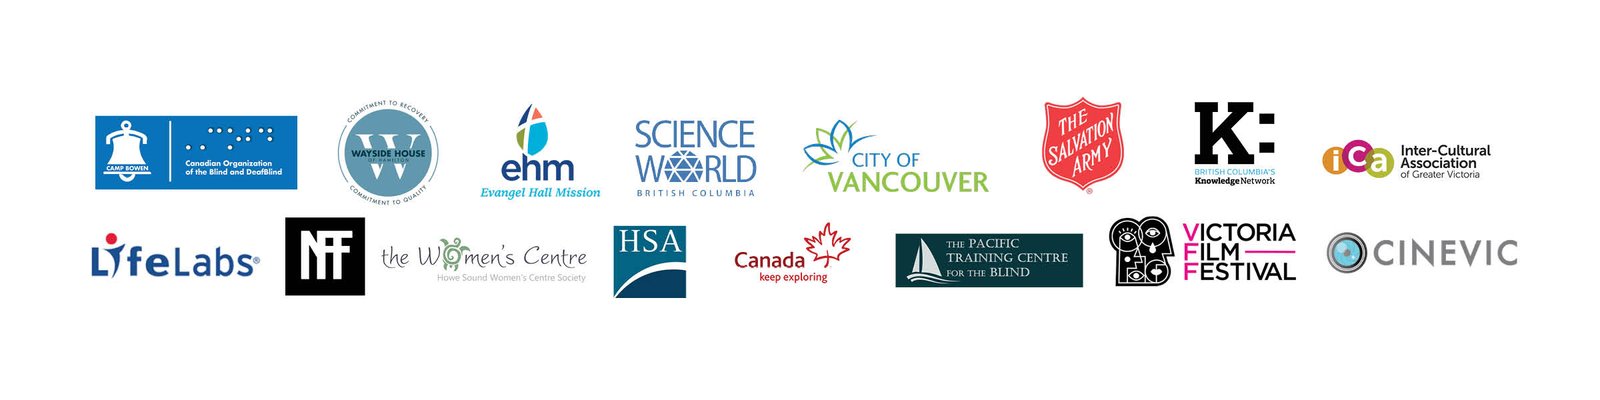 Logos of past clients: Canadian Organization of the Blind, ICA FolkFest, CineVic, HSA, Knowledge Network, Victoria Film Festival, Wayside House, Evangel Hall Mission. Salvation Army,